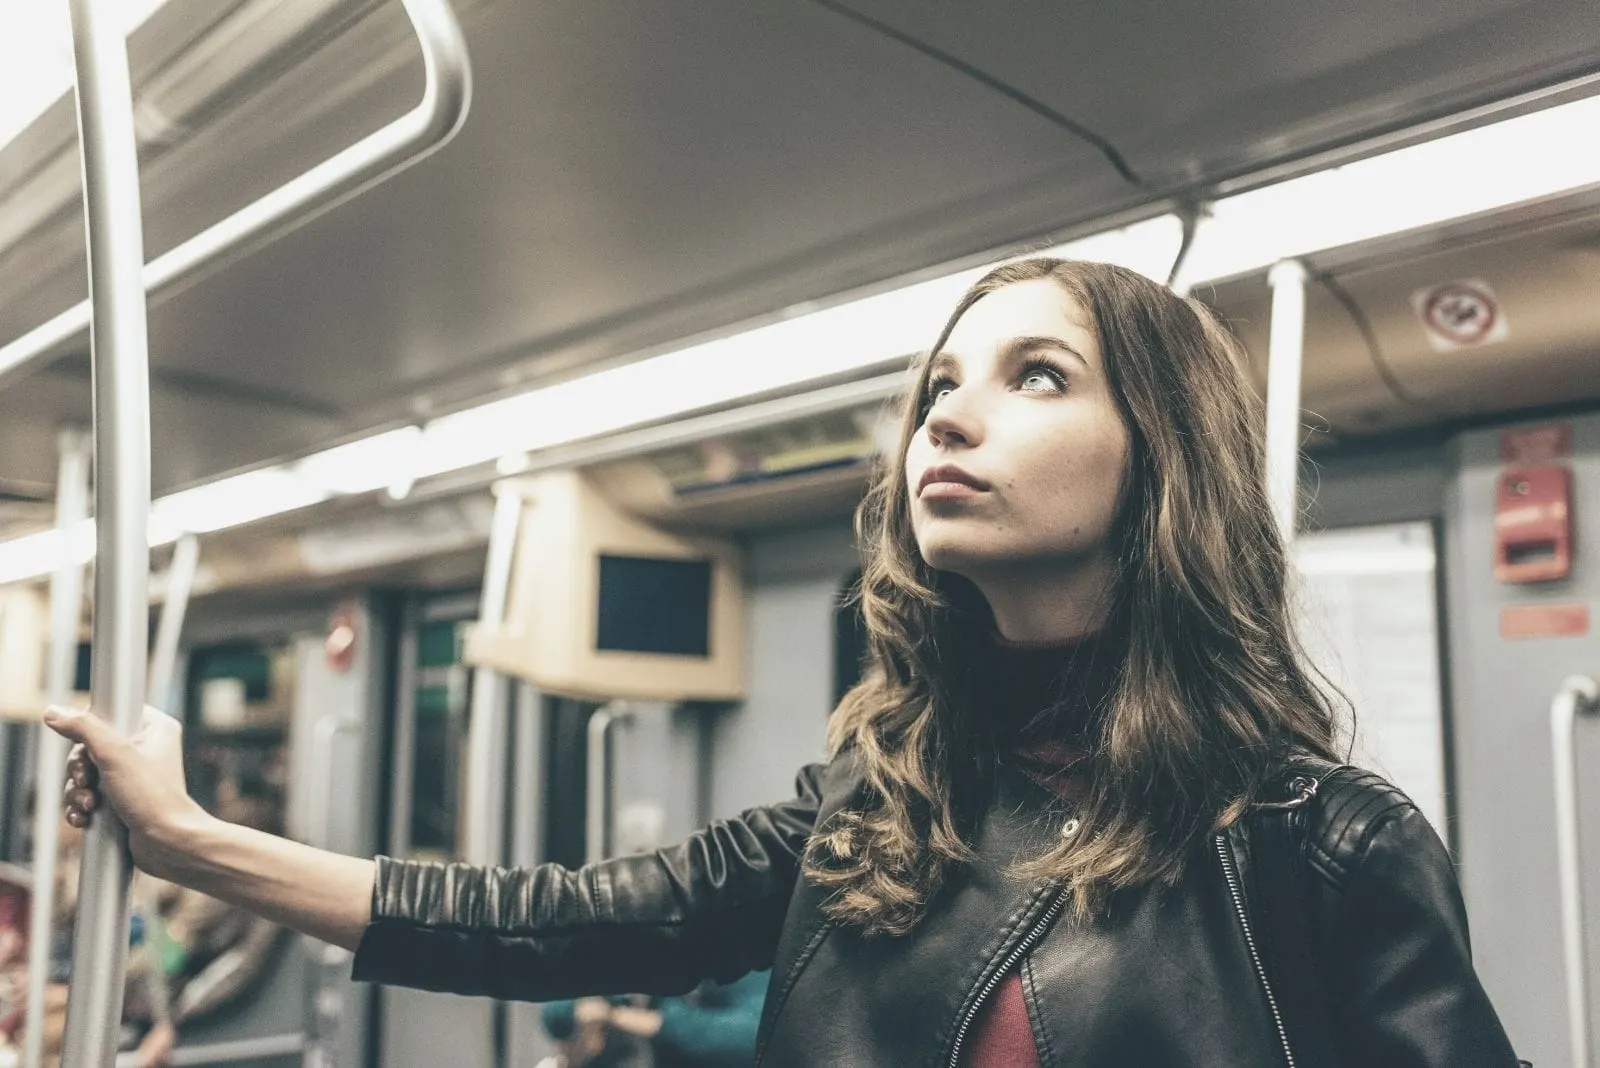 pensive woman travelling on a subway standing and holding the railing looking upwards